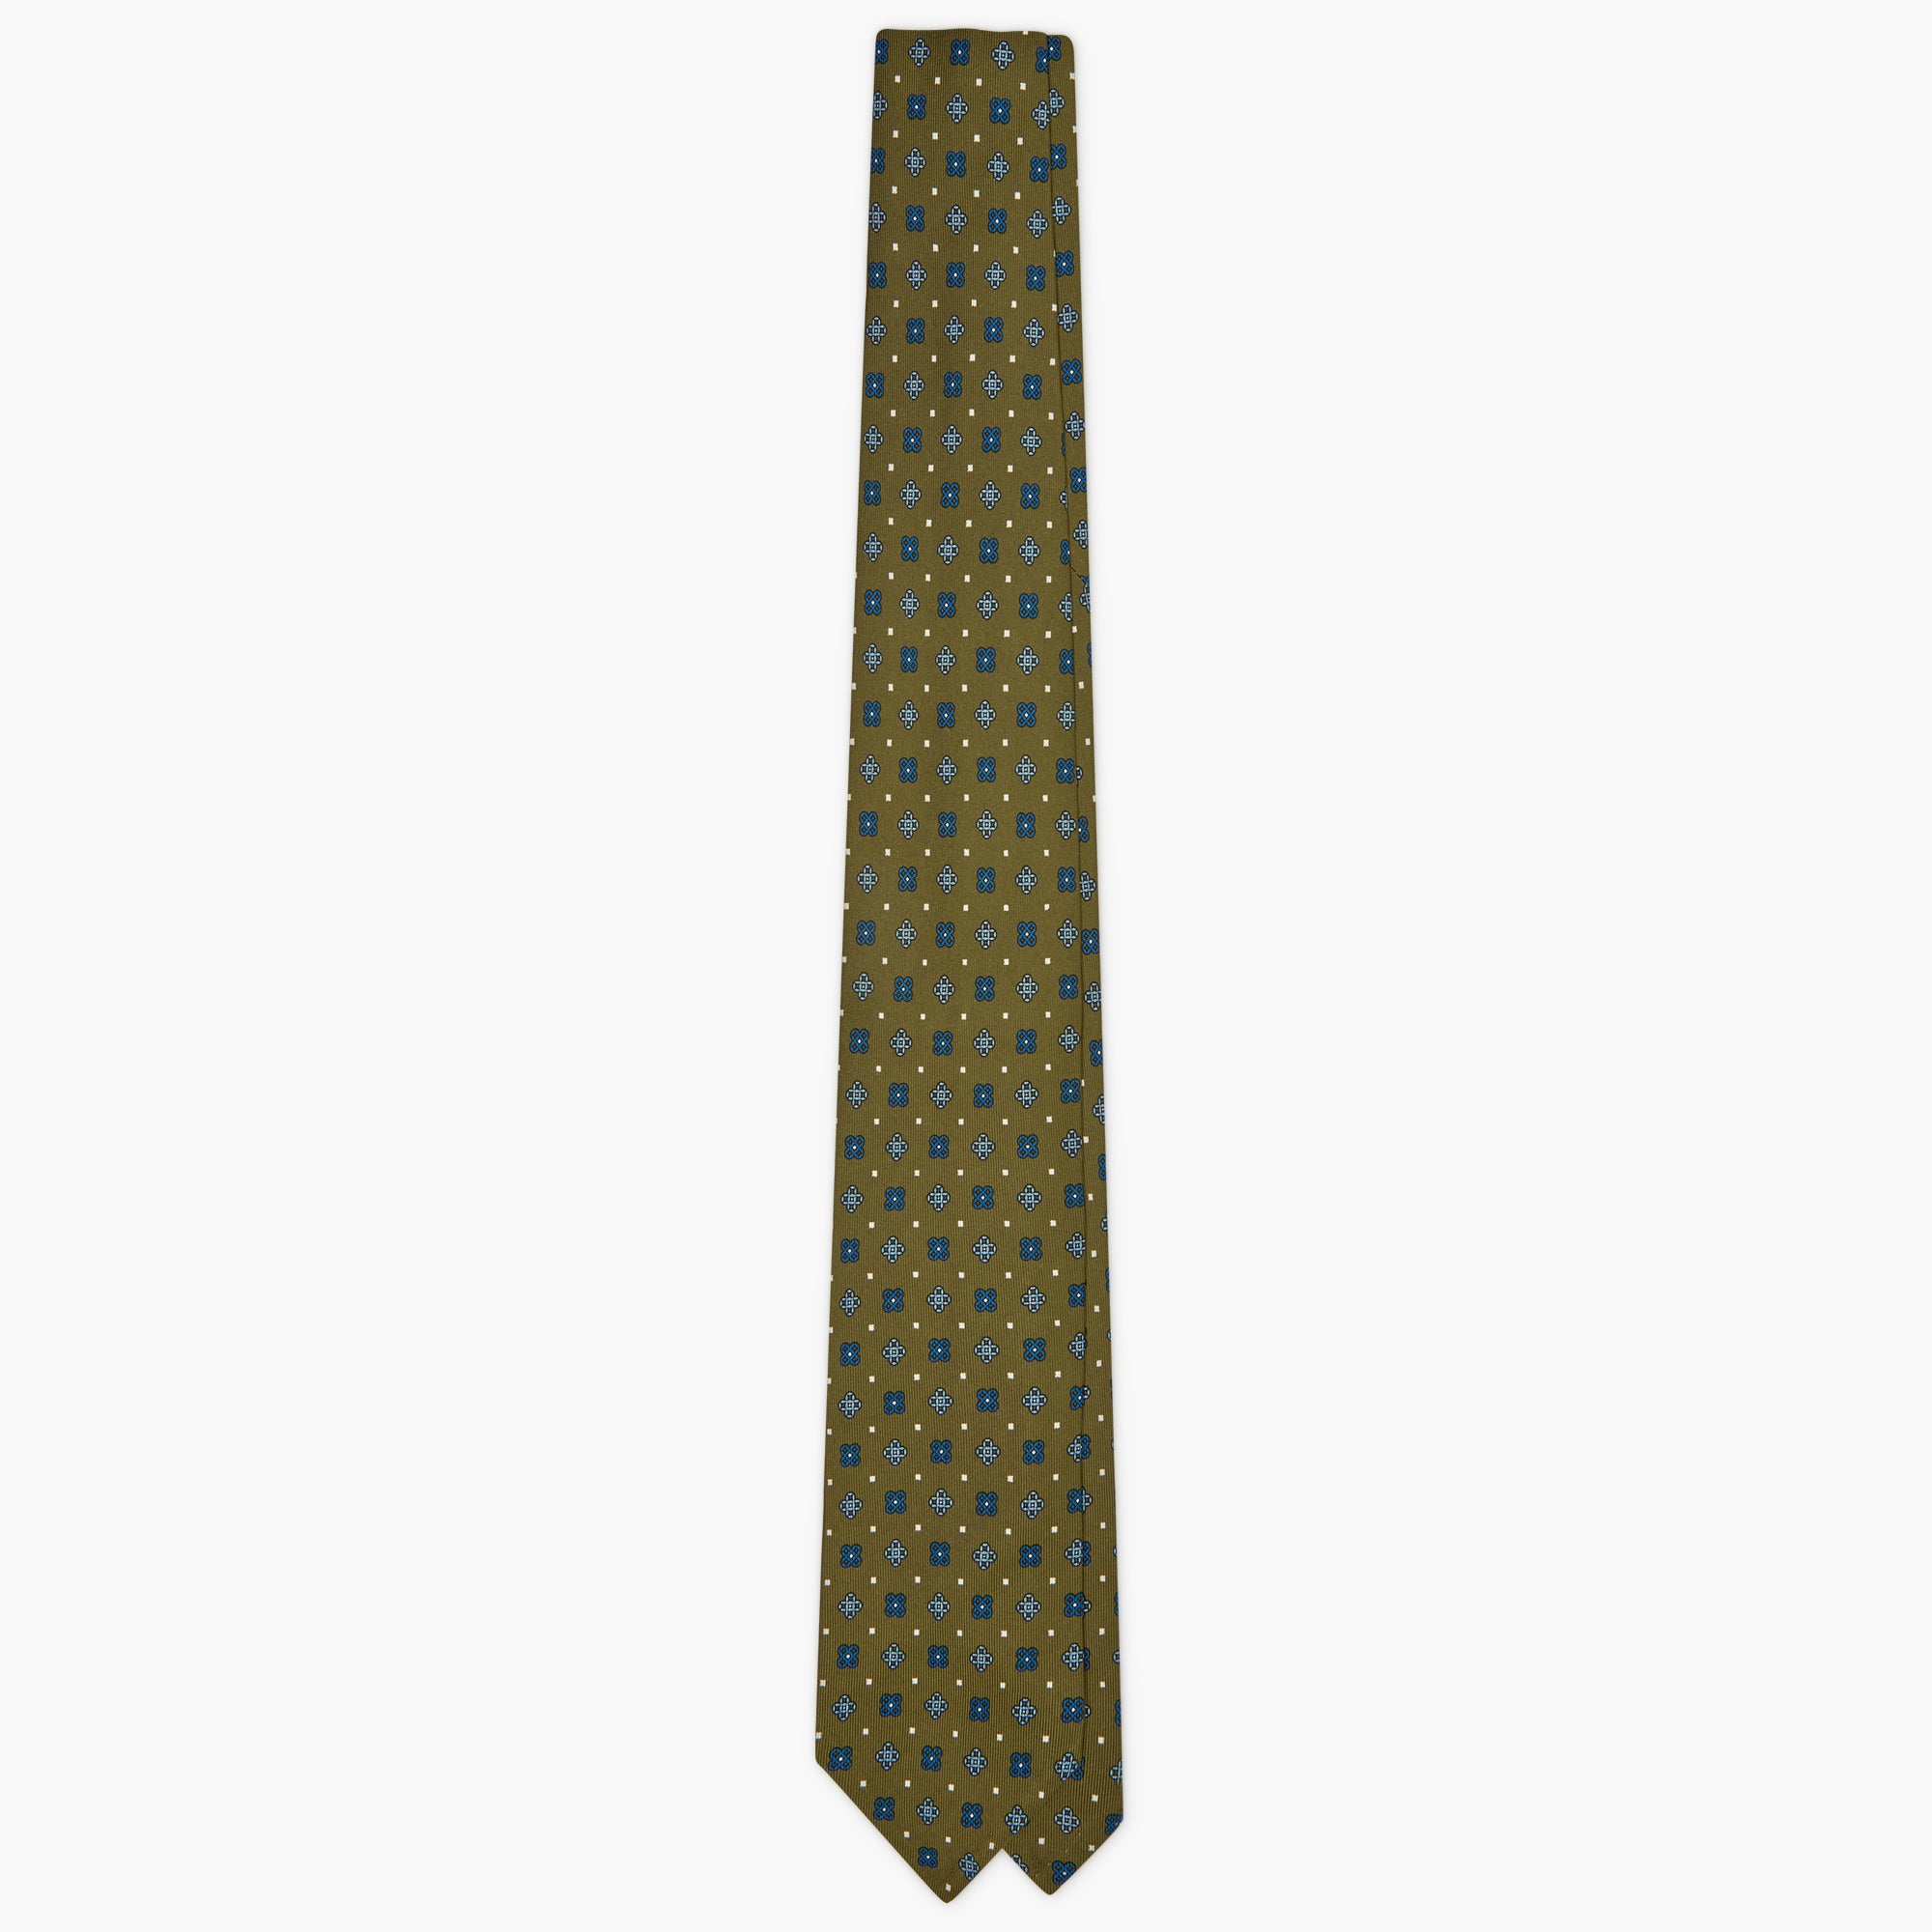 3-Fold Floral Printed English Silk Tie - Forest Green